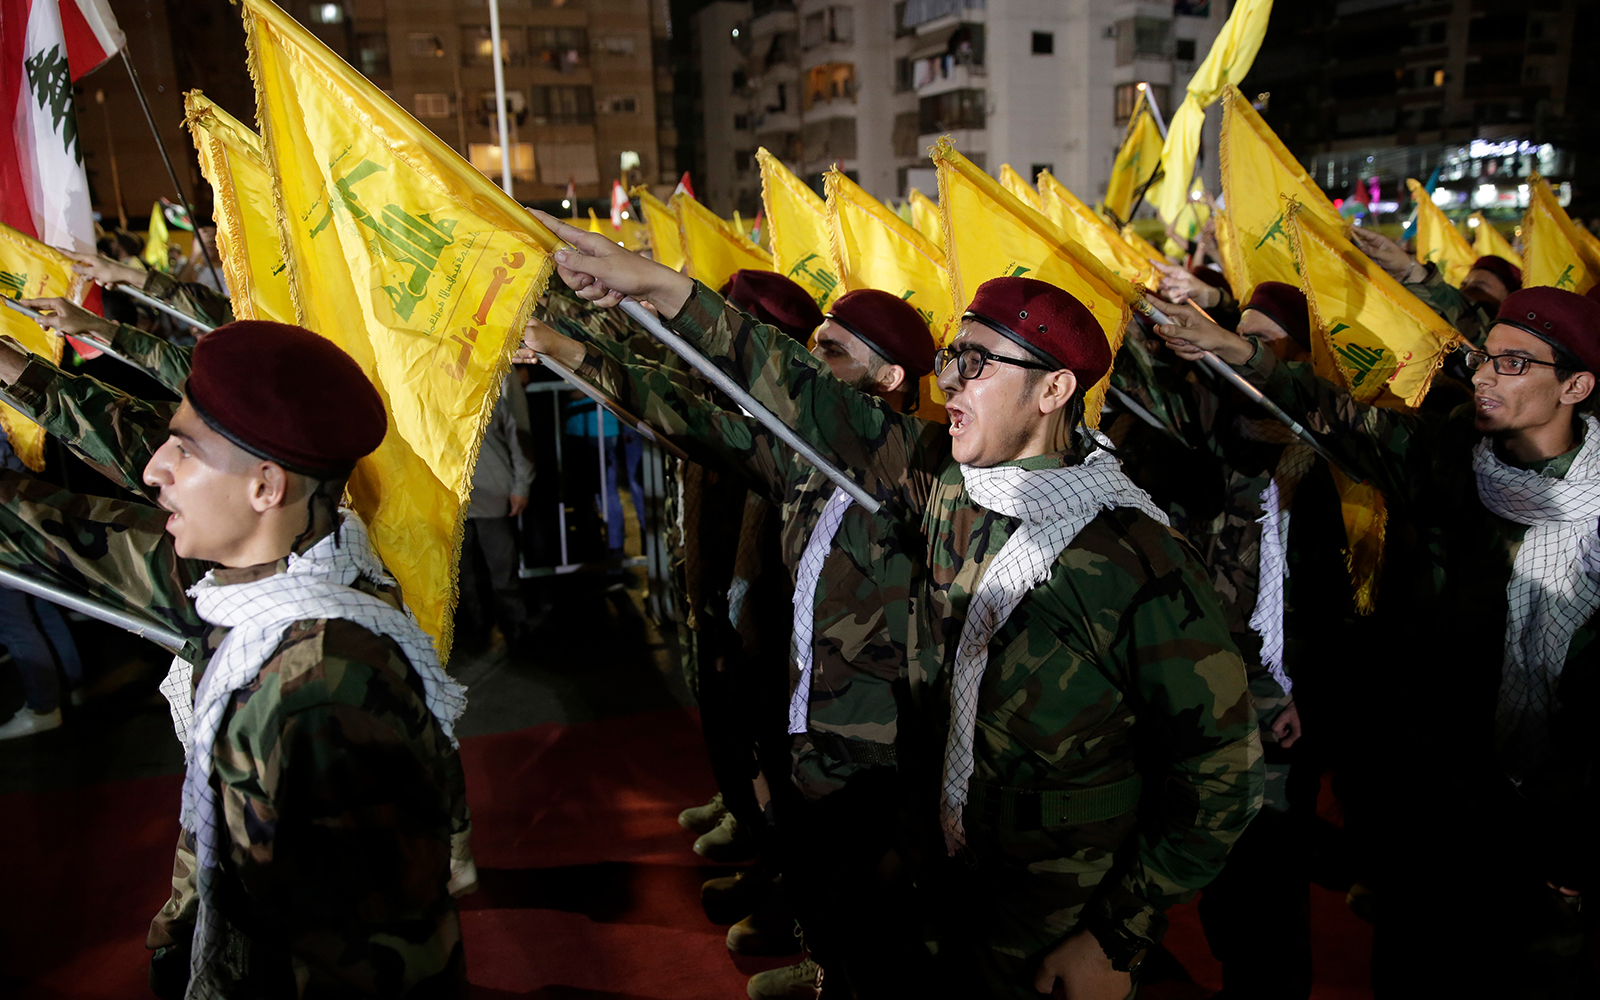 As sanctions choke Iran, Hezbollah reportedly deploying for war on Israel border | The Times of Israel